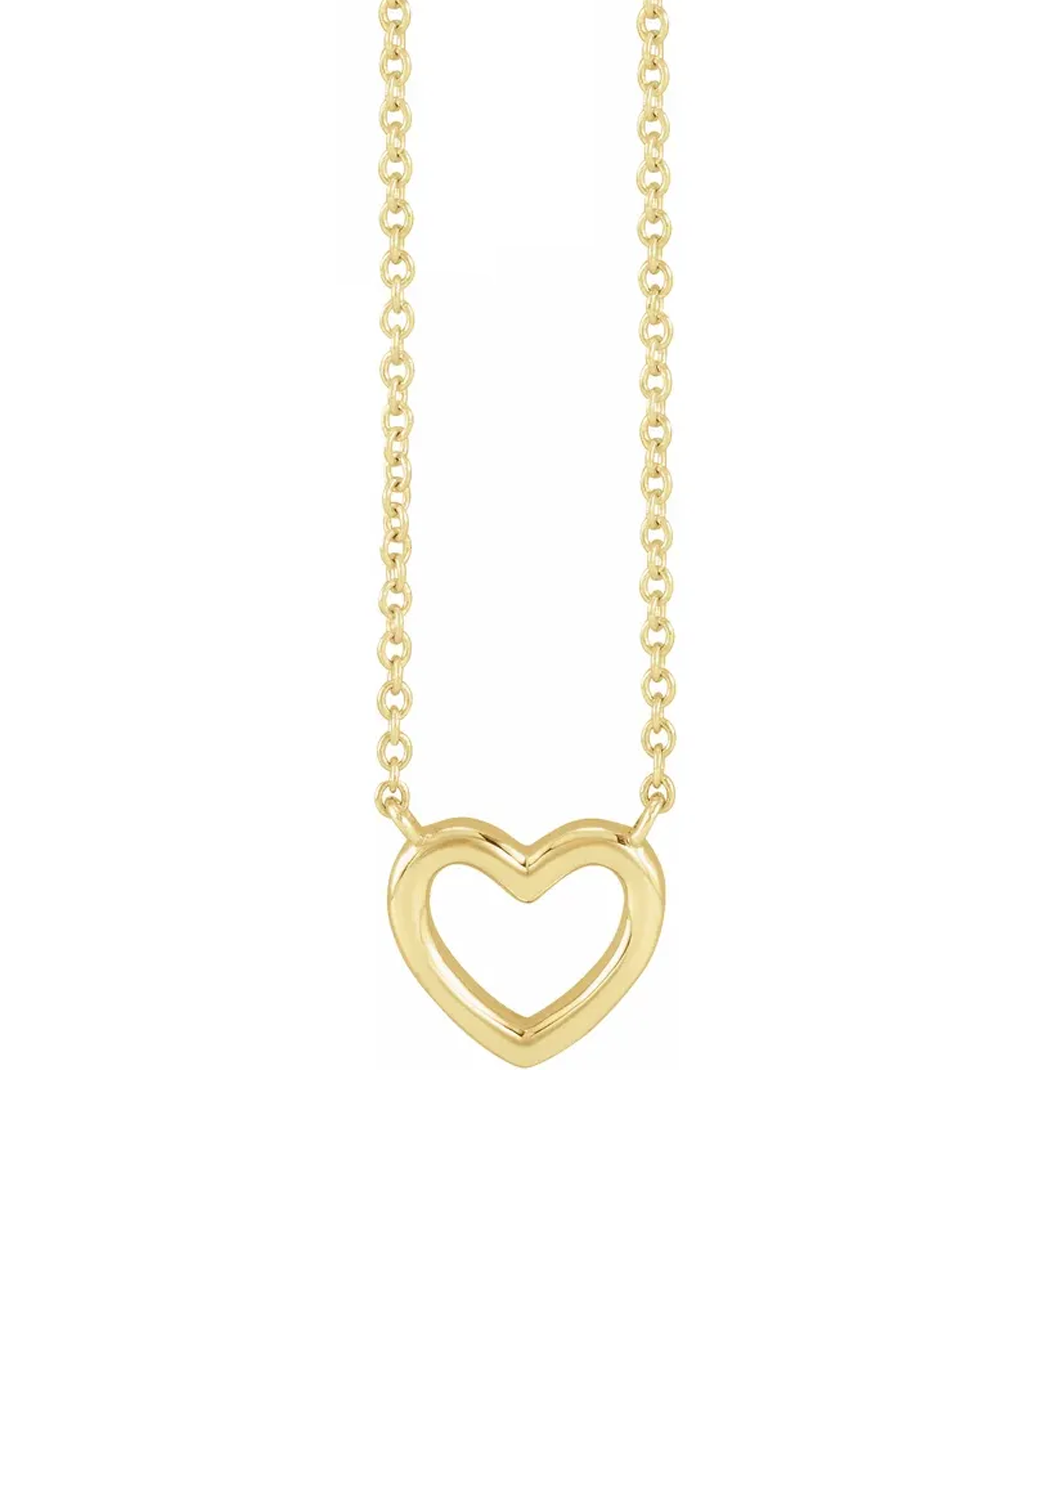 14K Yellow Gold Petite Open Heart Necklace | OsterJewelers.com